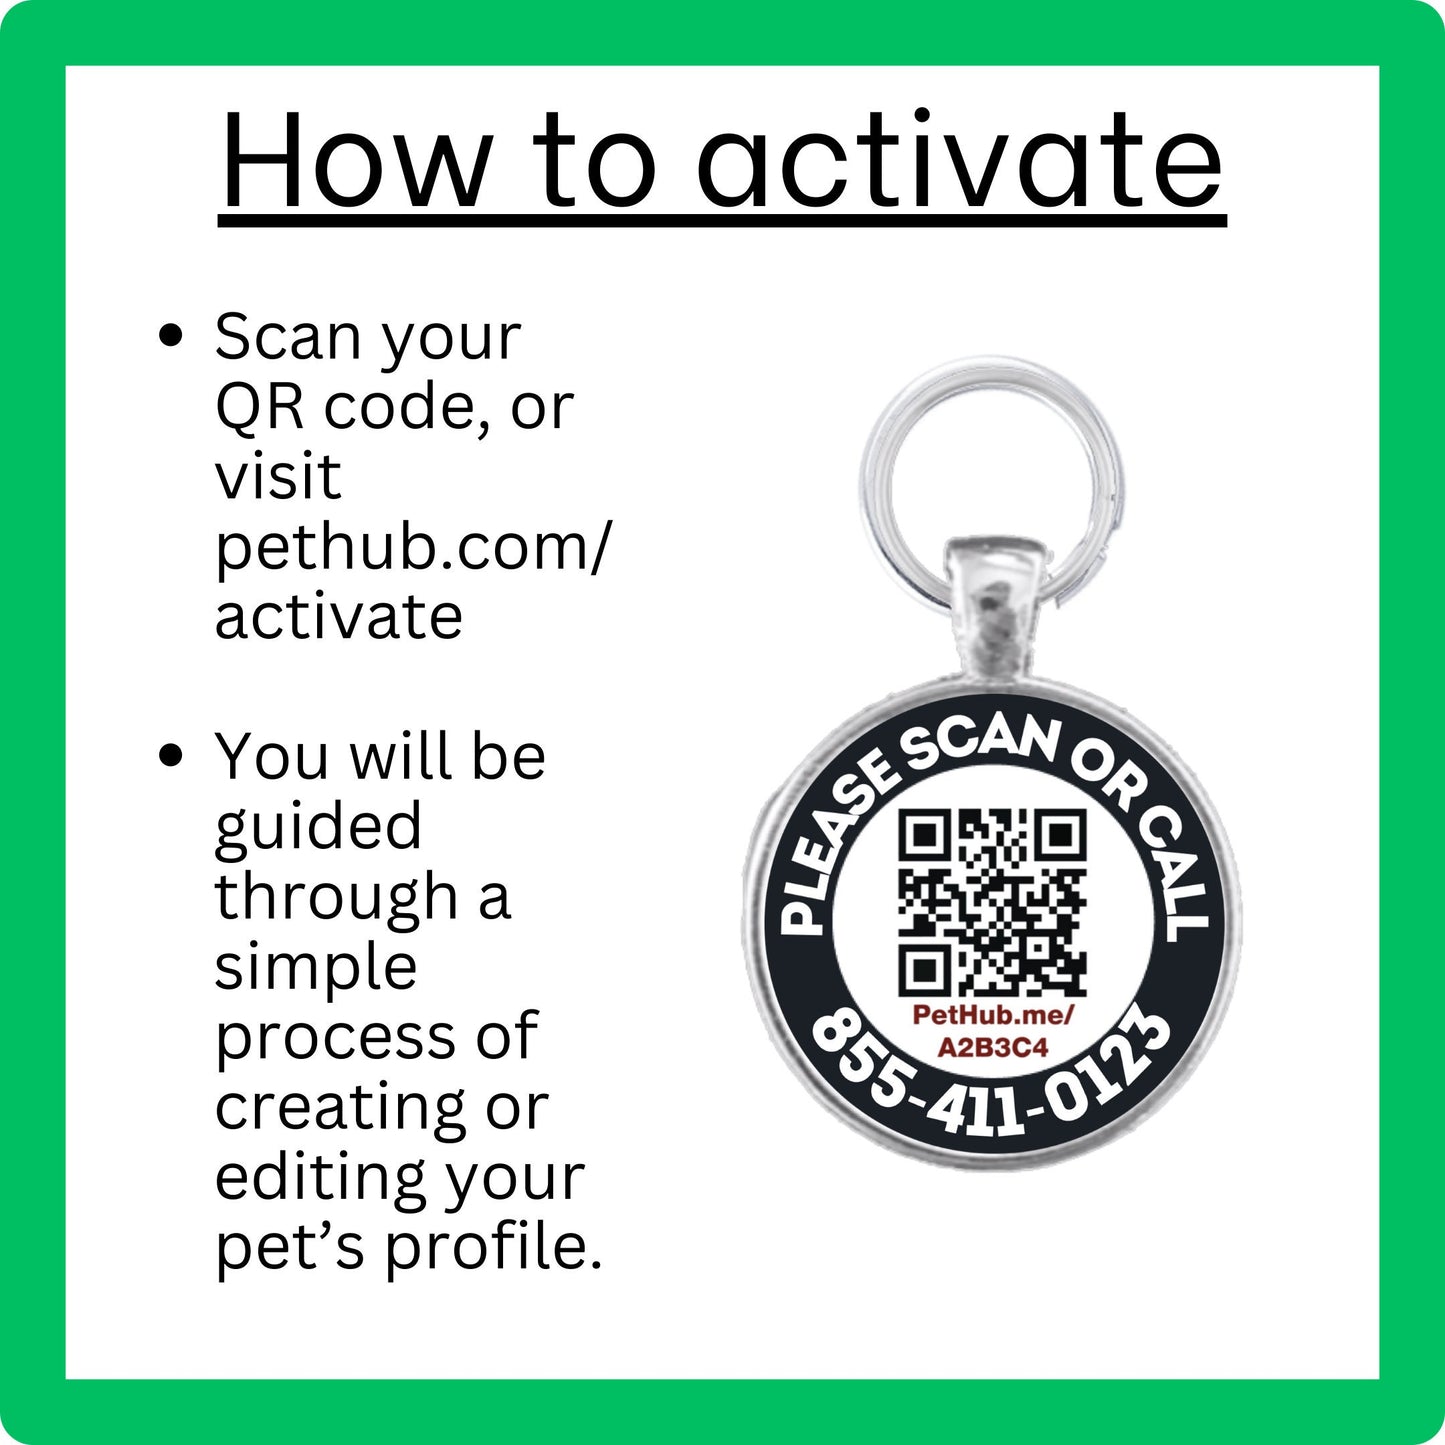 QR Code Dog Tag Cat ID Free PetHub Profile and Lost Pet Hotline- non personalized